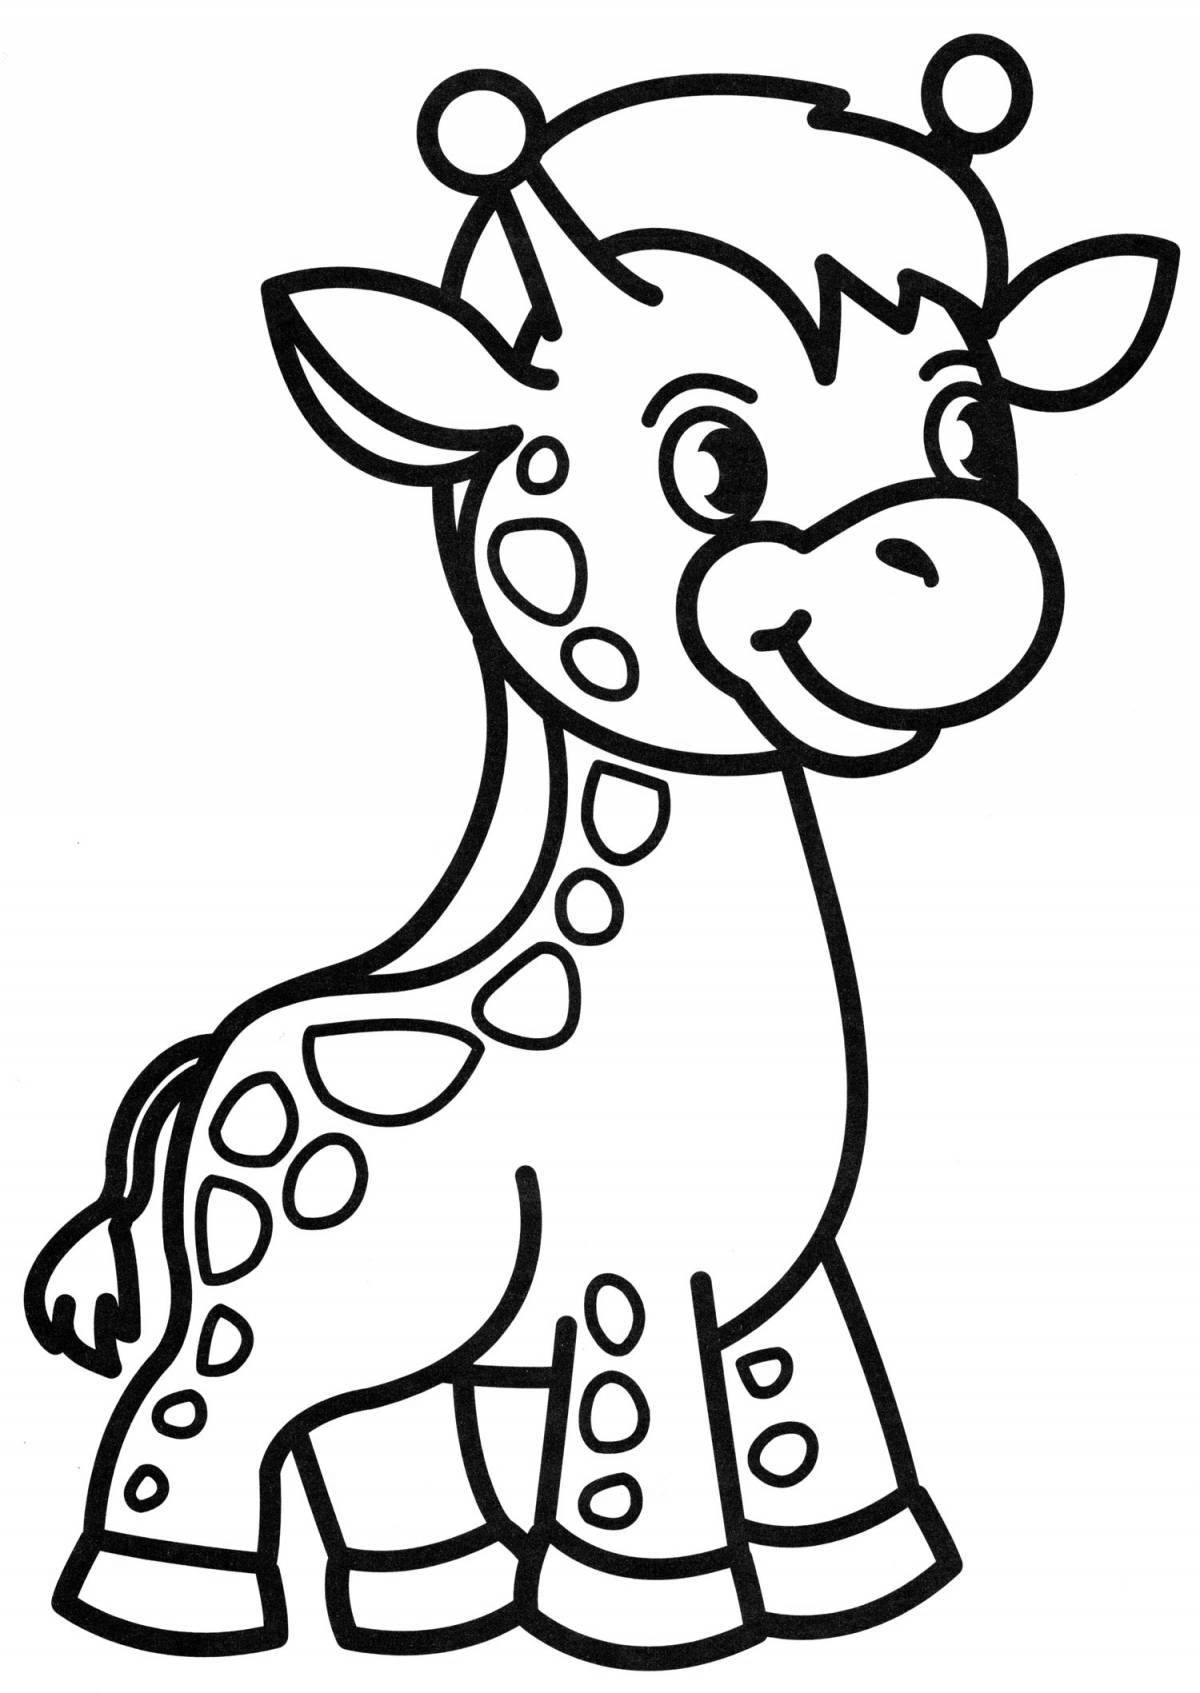 Bright coloring giraffe for children 3-4 years old